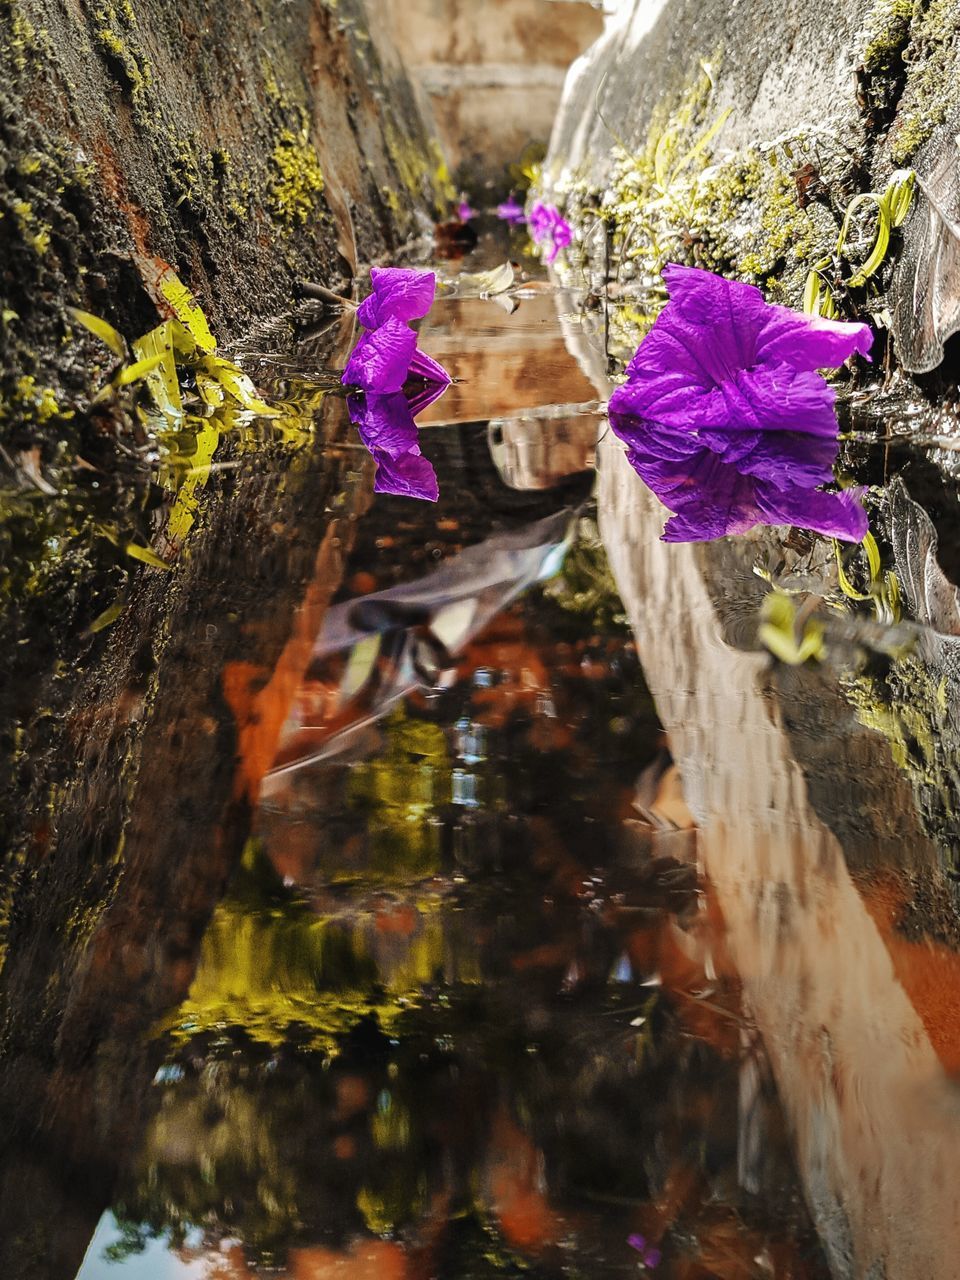 CLOSE-UP OF PURPLE FLOWERING PLANT BY WATER